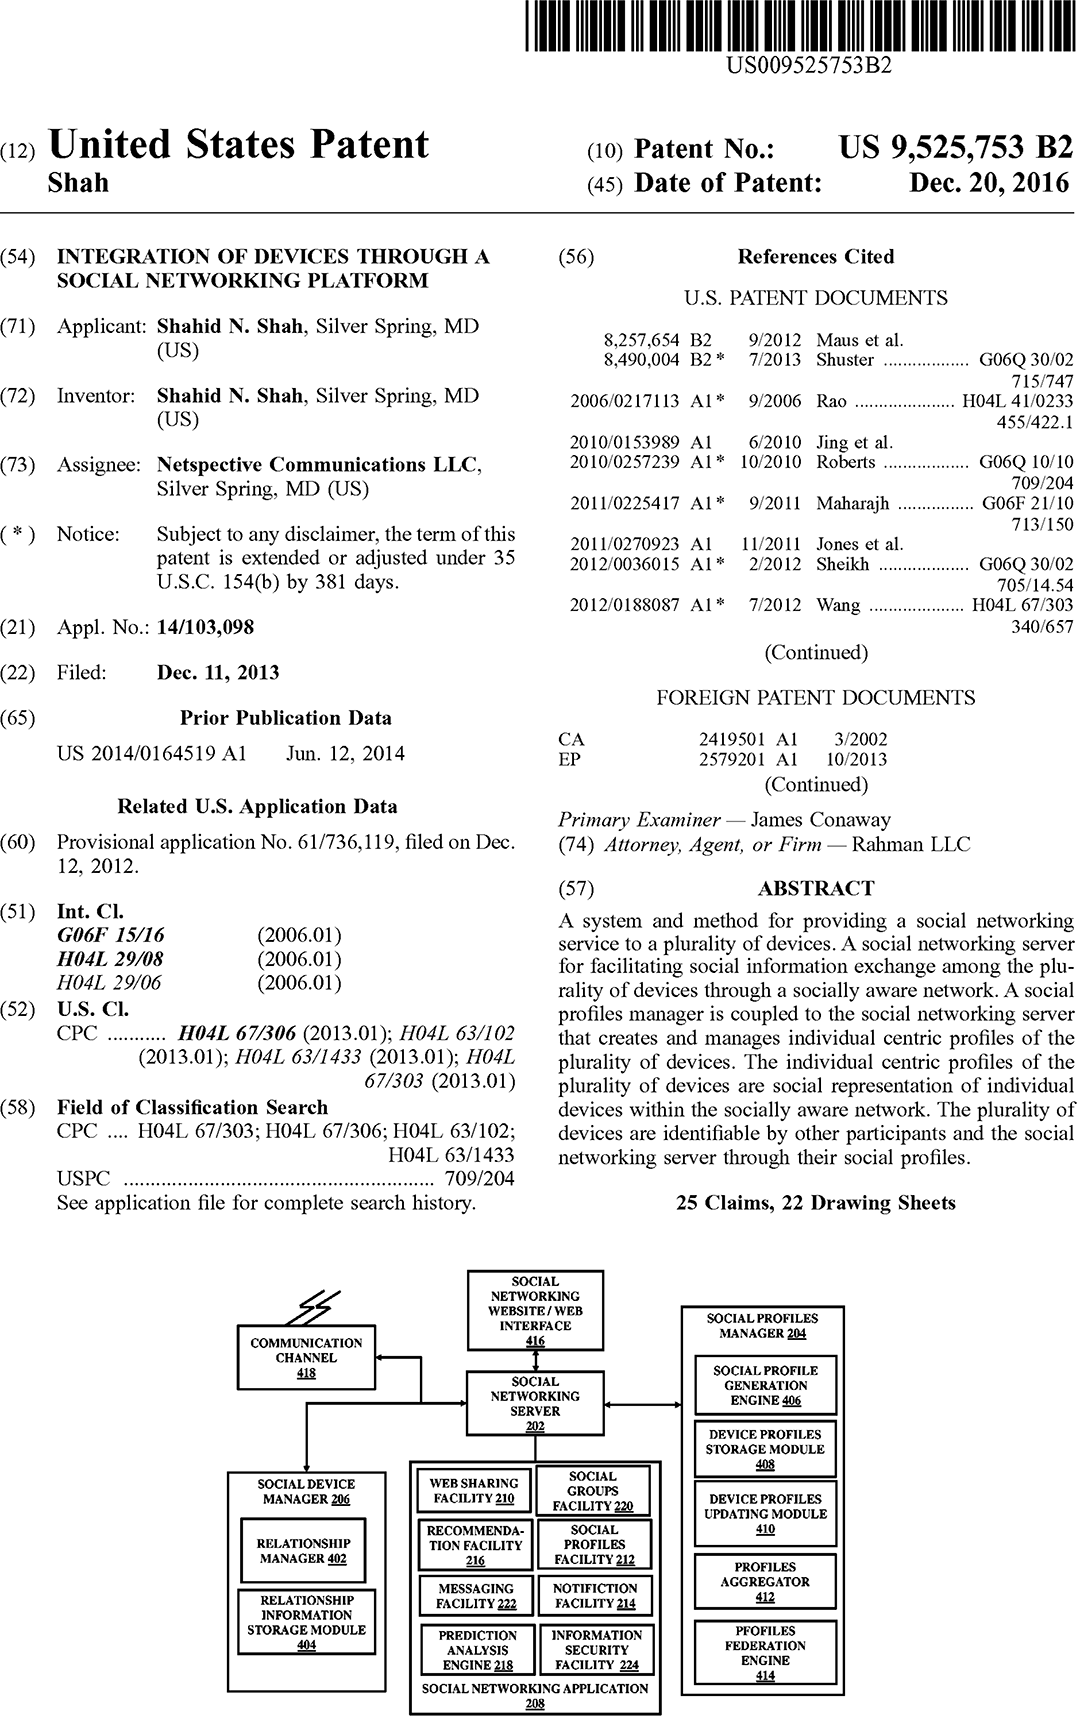 integration of devices patent